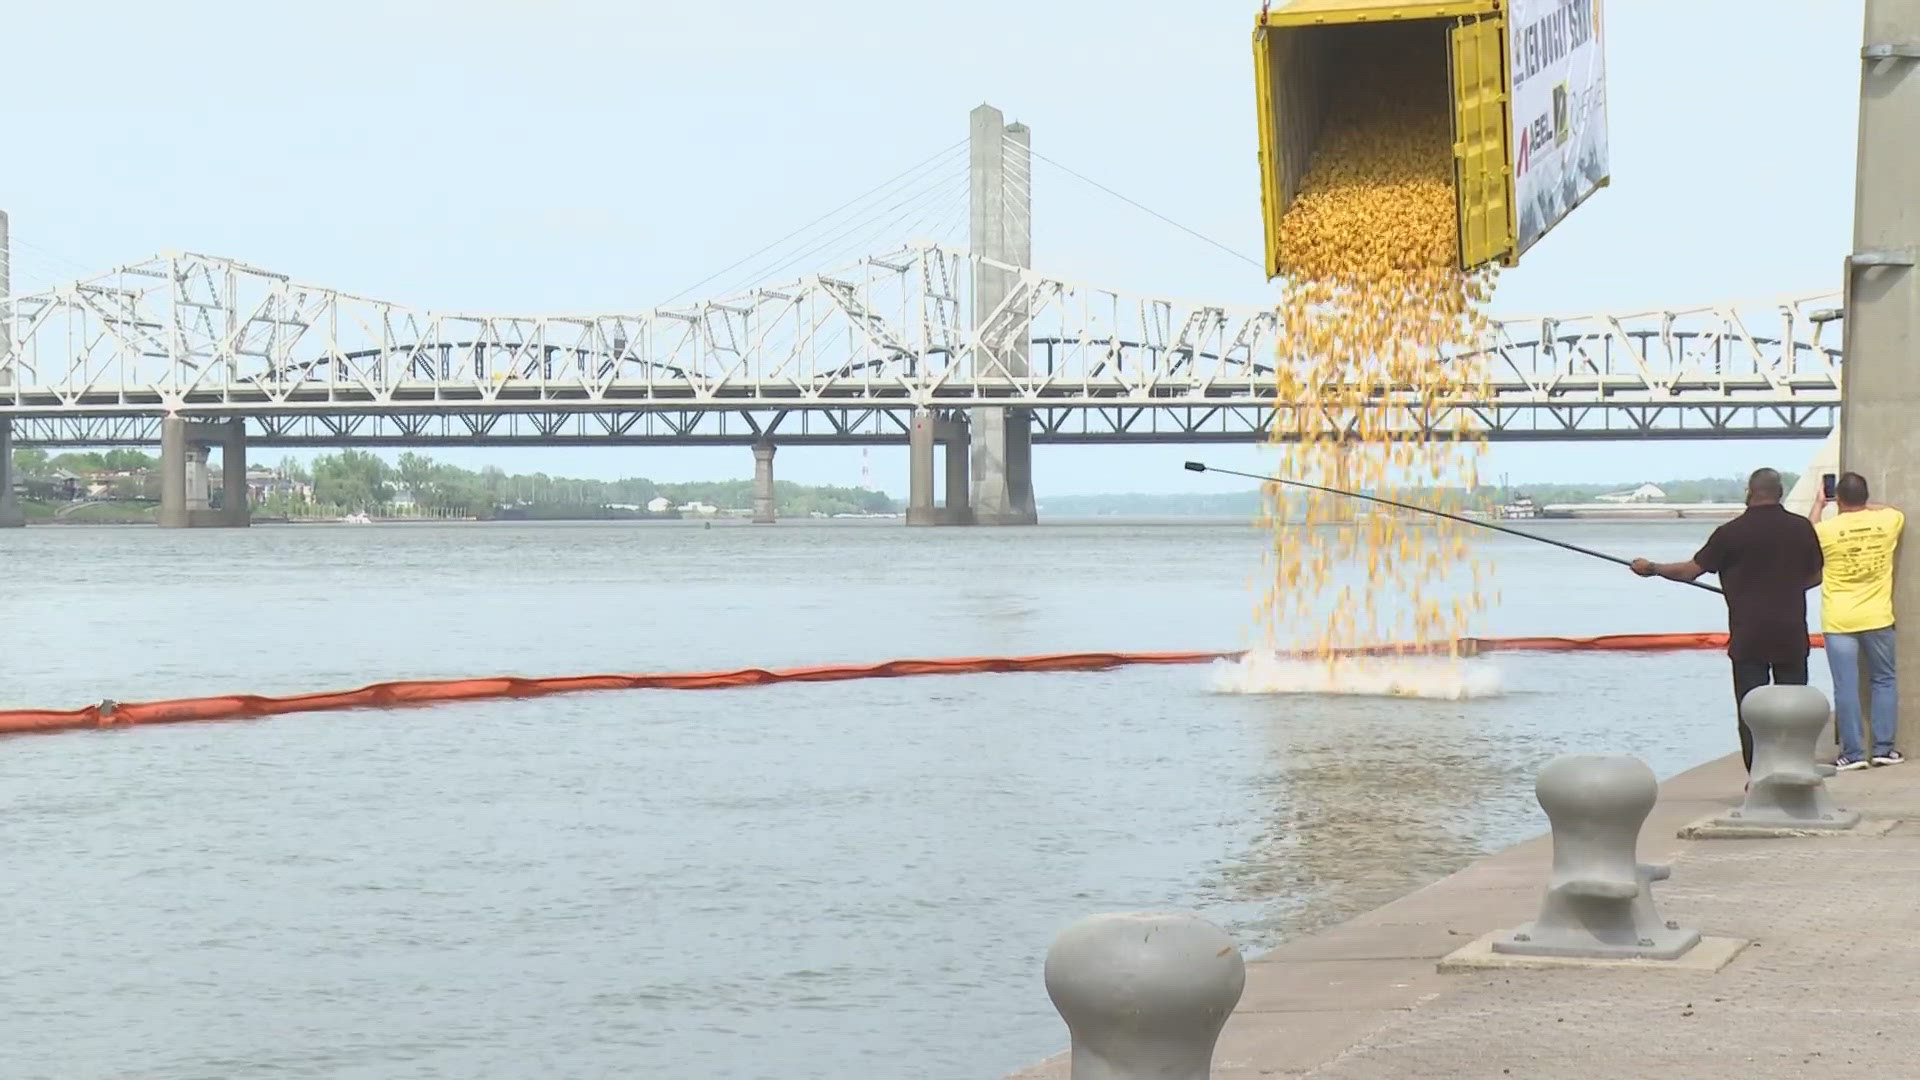 Thousands of rubber ducks were dumped in the Ohio River. The event benefits Harbor House of Louisville, a nonprofit that serves adults with disabilities.